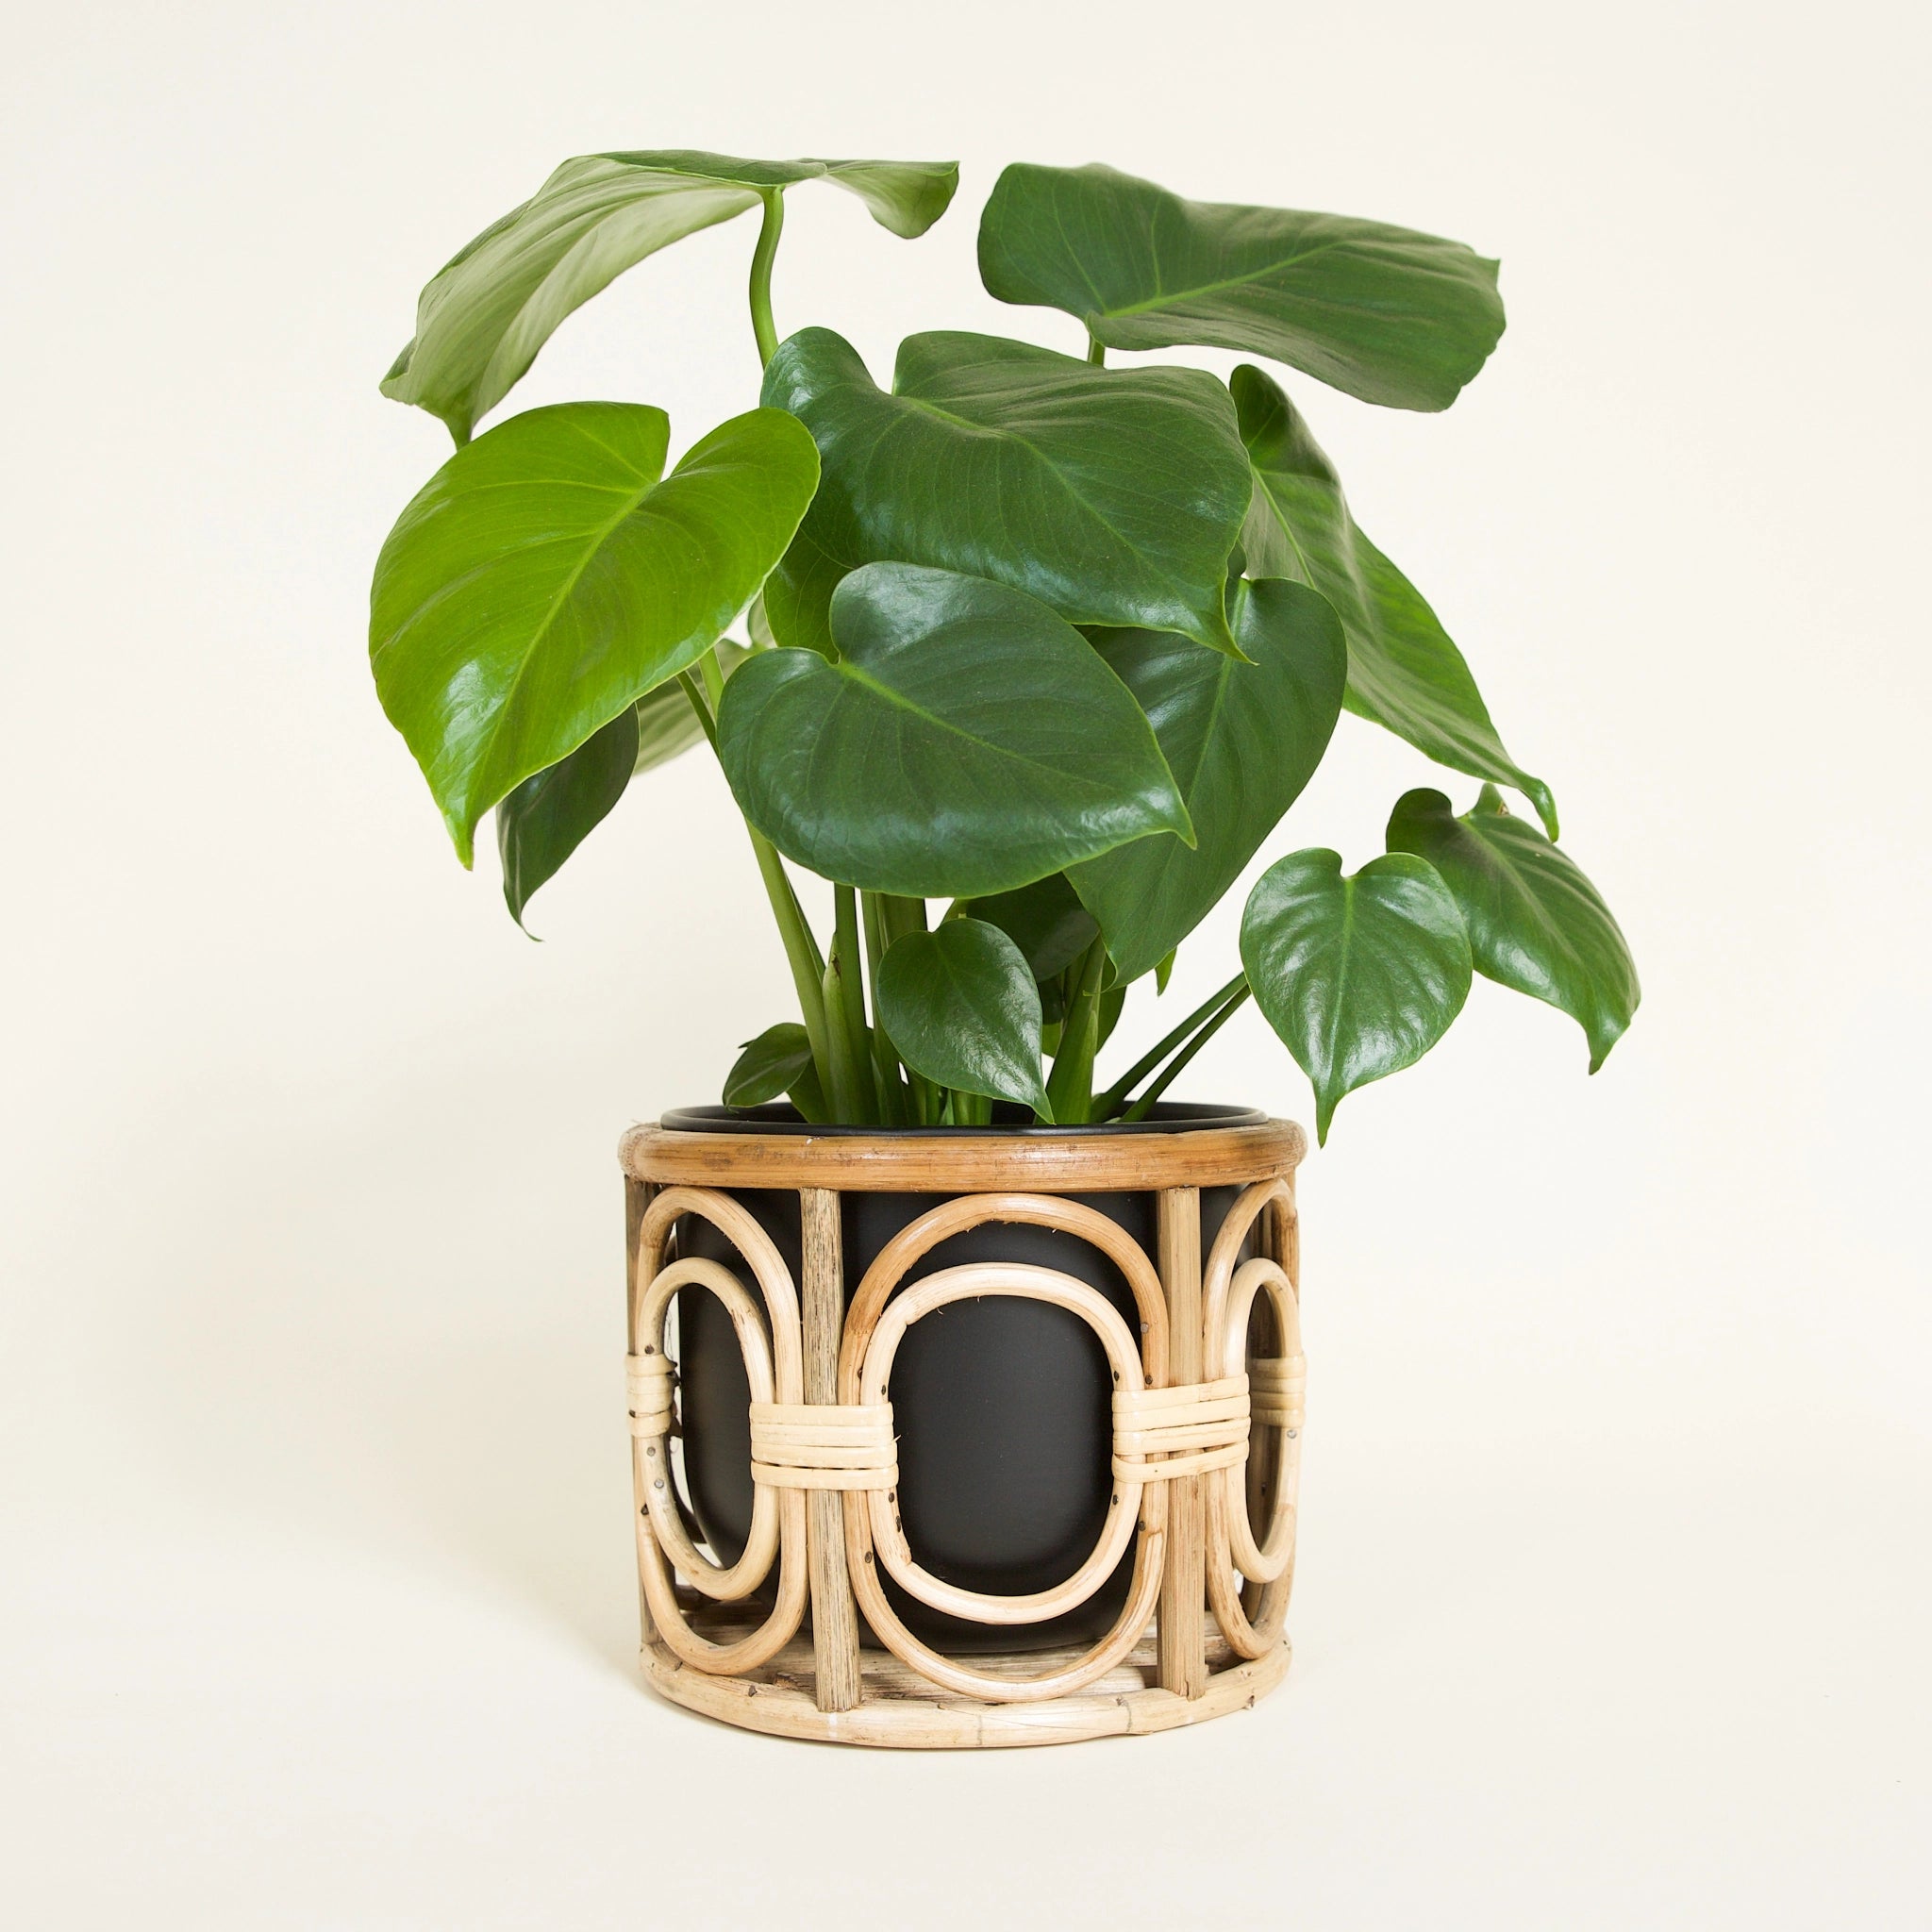  table top rattan plant stand with black metal insert pot. Stand features bent wood layered open ovals that wrap around the pot and are separated by vertical lines of wood. Green philodendron plant with pointed leaves is featured in the pot.